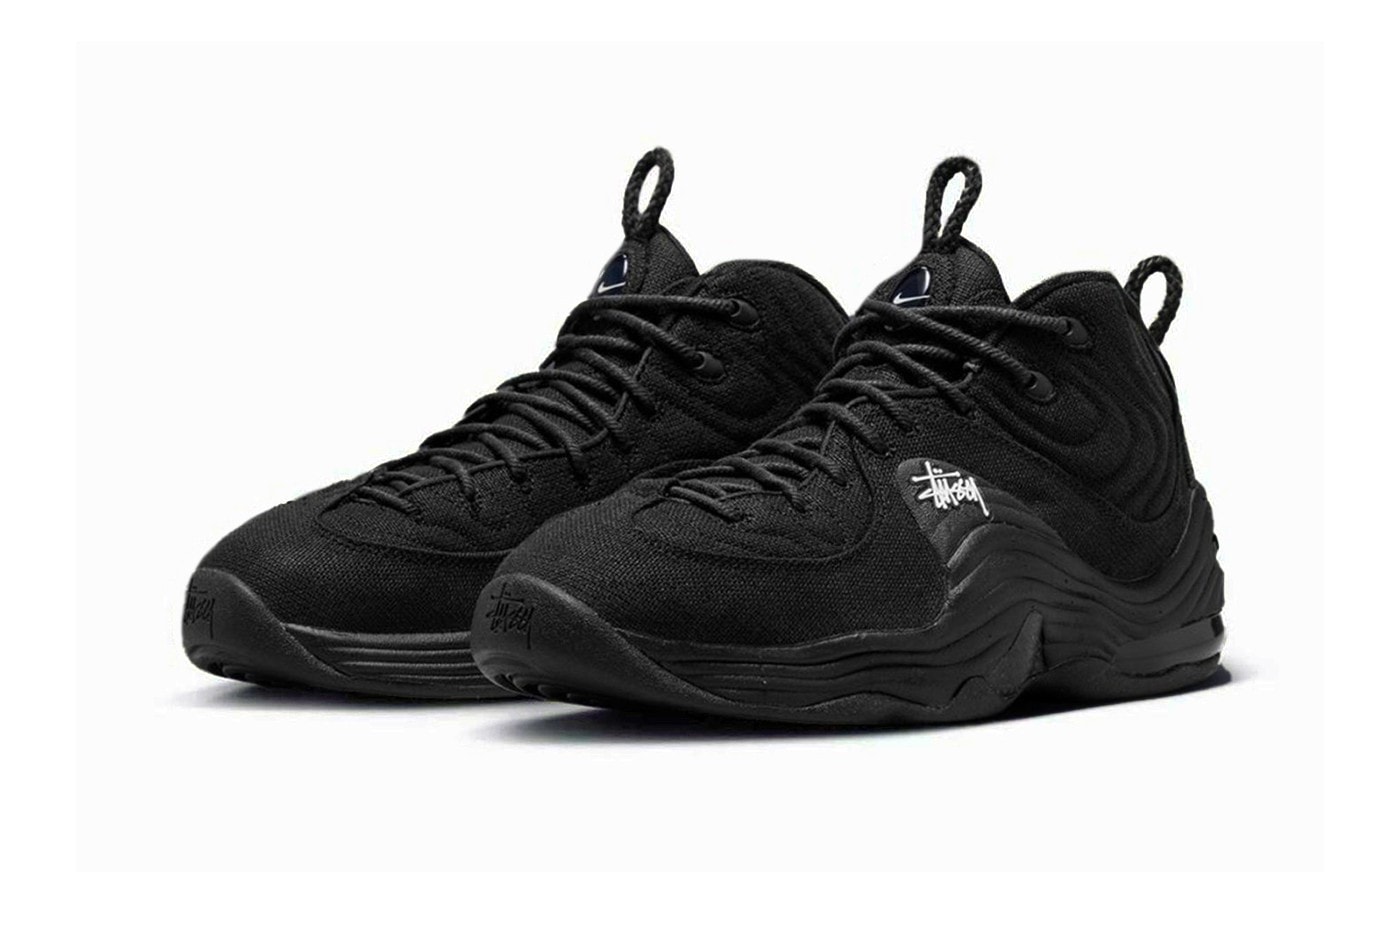 Stussy Nike Air Penny 2 Green Black Collaboration Release Date Where to buy